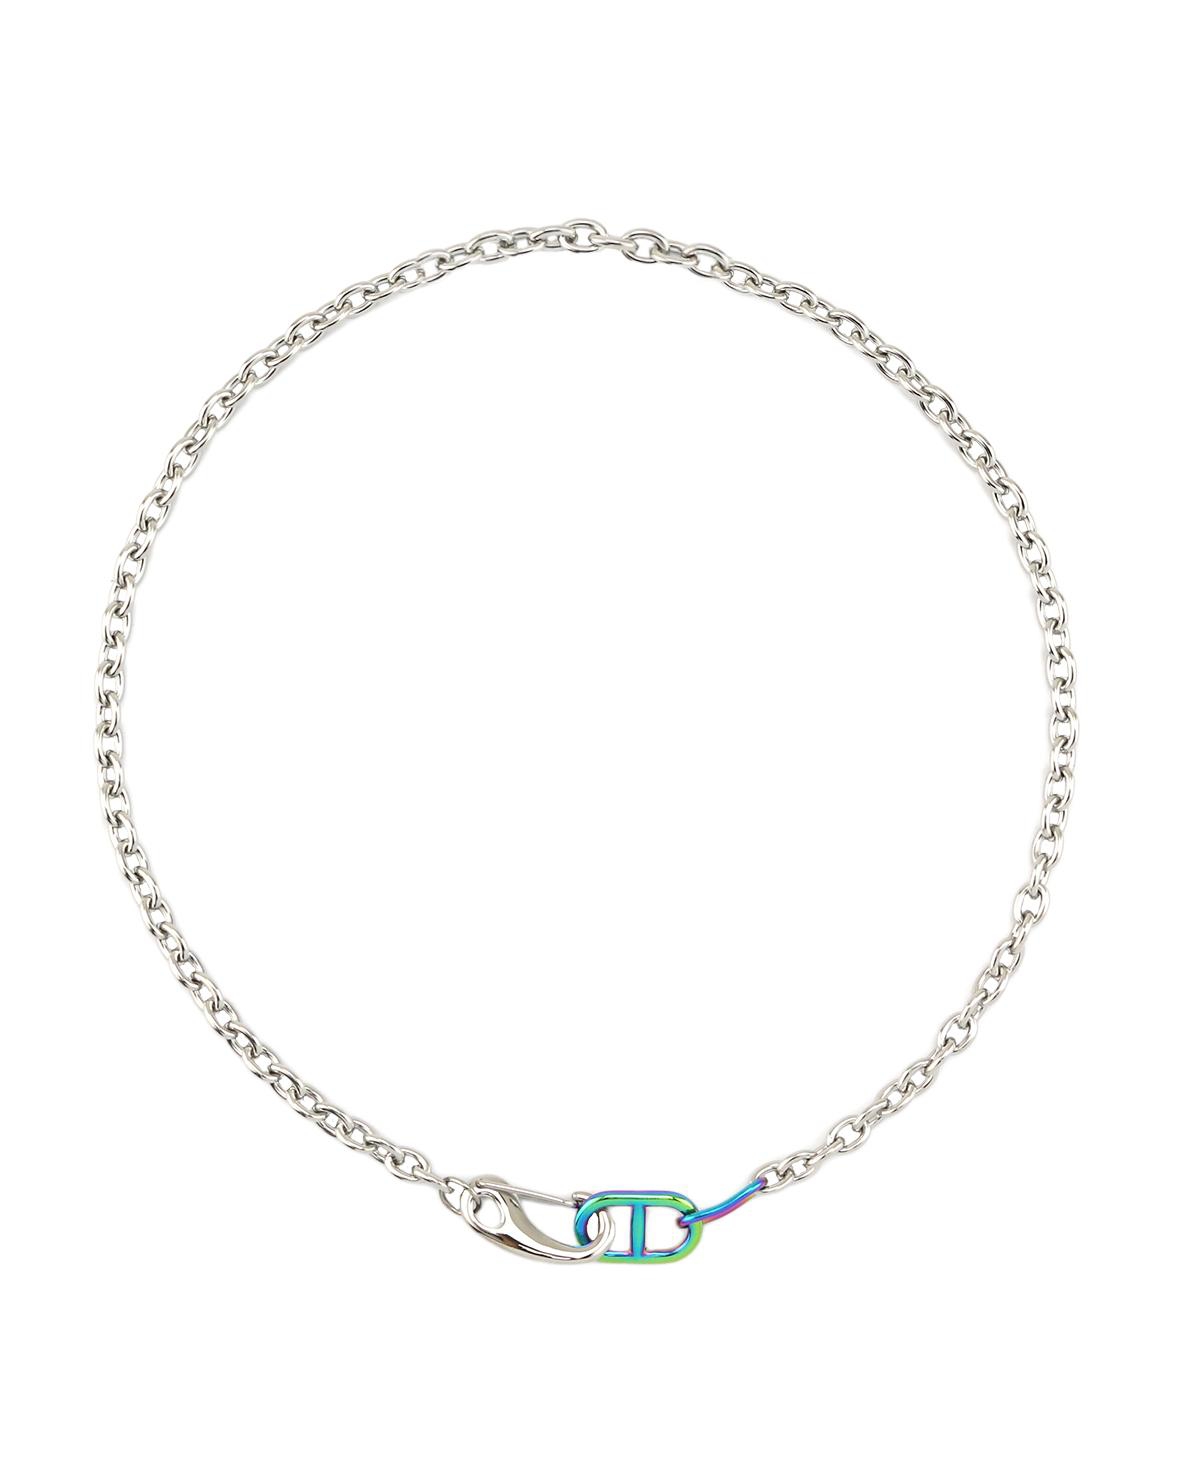 Peggy Mixed Metal Chain Necklace - Rainbow